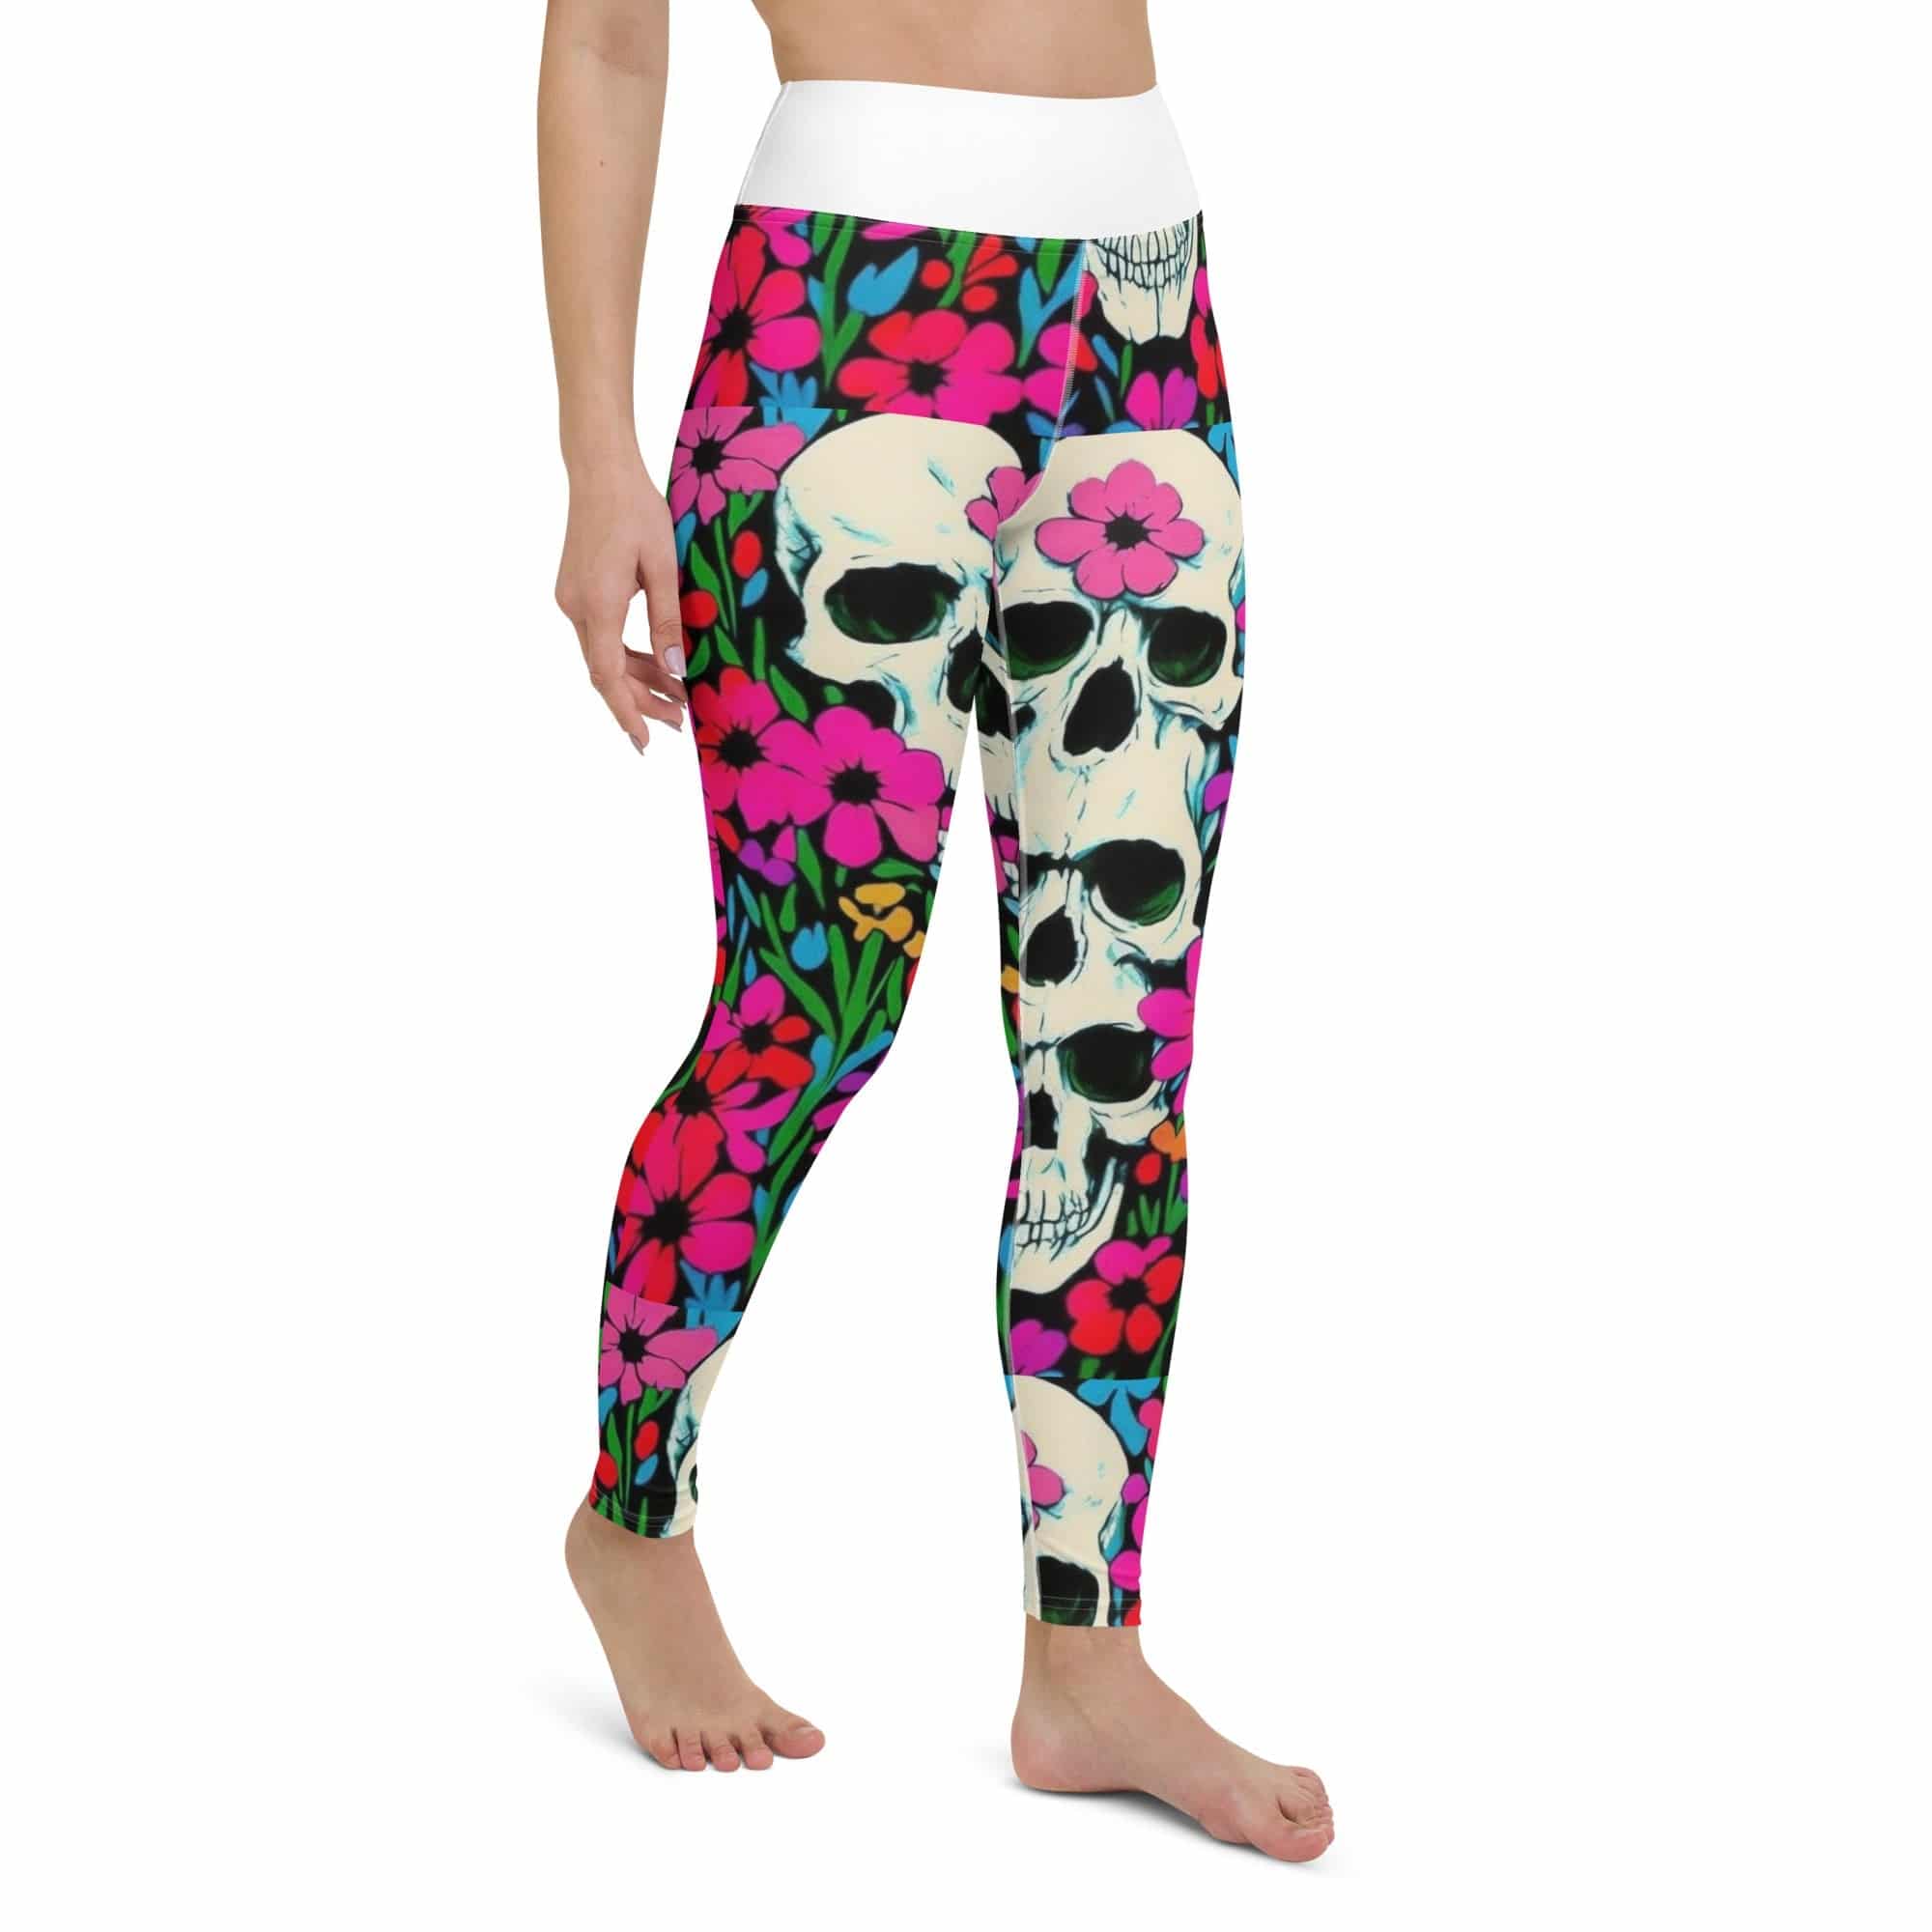 Indulge in Celestial Love with Guy Christopher's Yoga Leggings - Embrace Your Majestic Royalty on the Mat - Experience Luxurious Comfort While Saving Our Planet - Guy Christopher